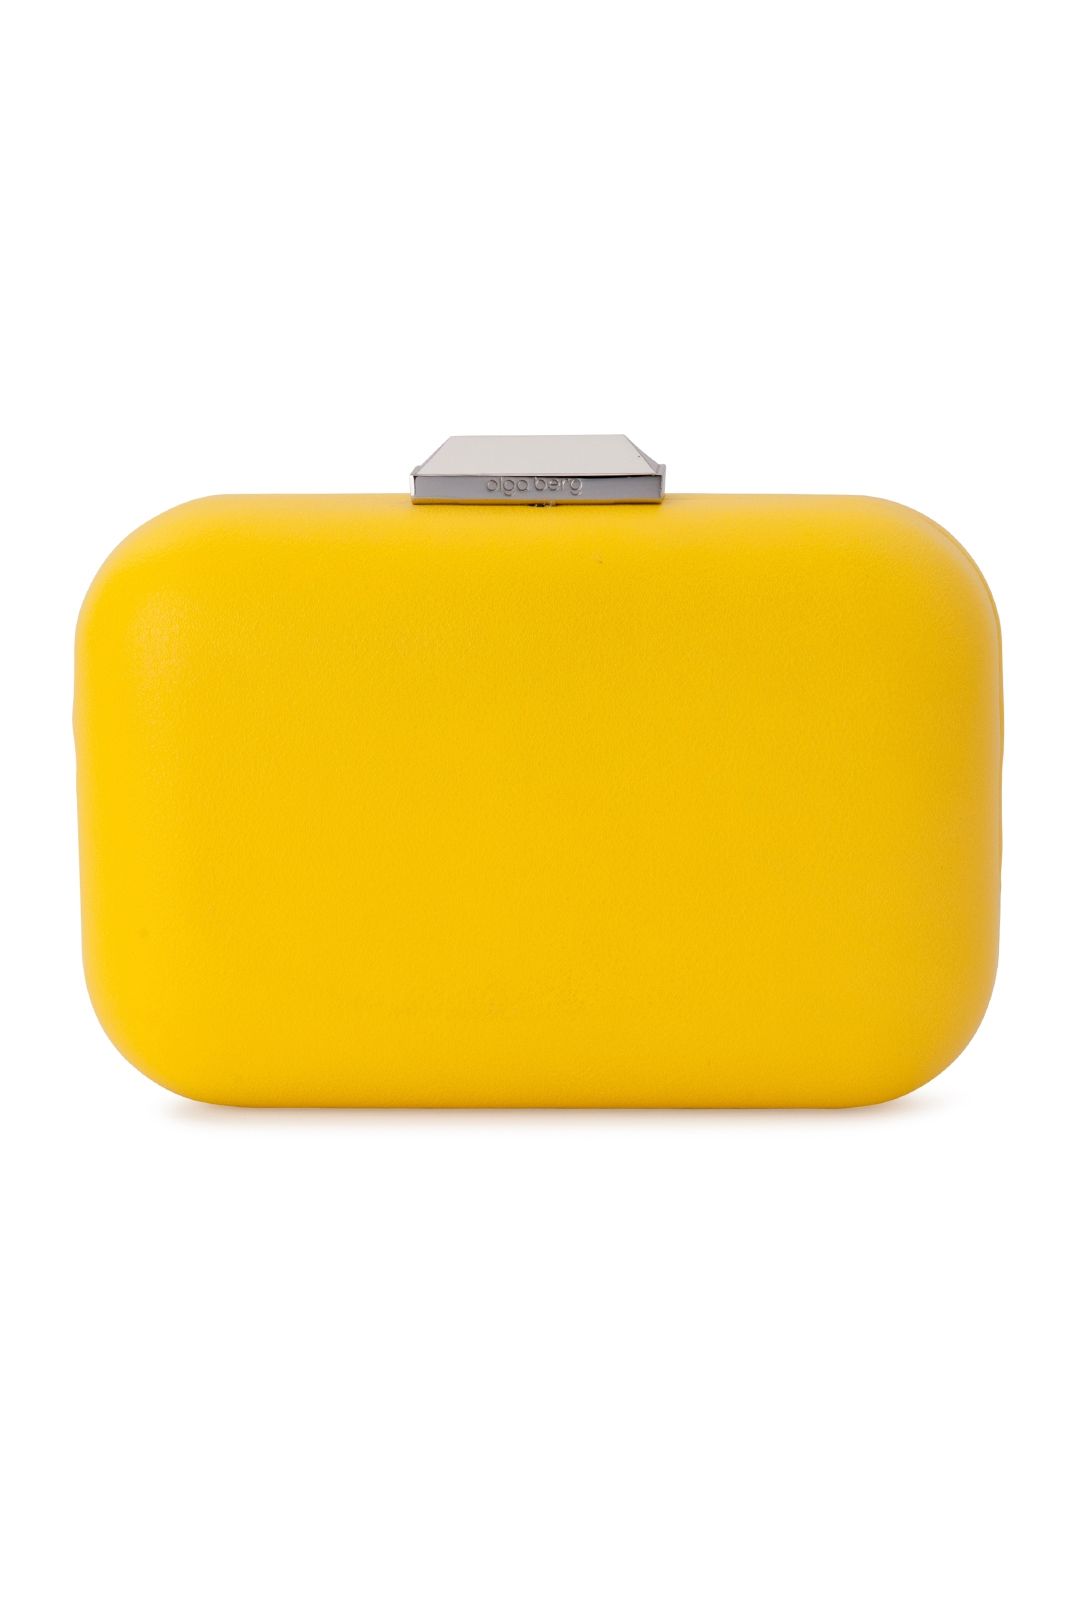 Olga Berg - Kinslee Simple Rounded Pod - Yellow - Front